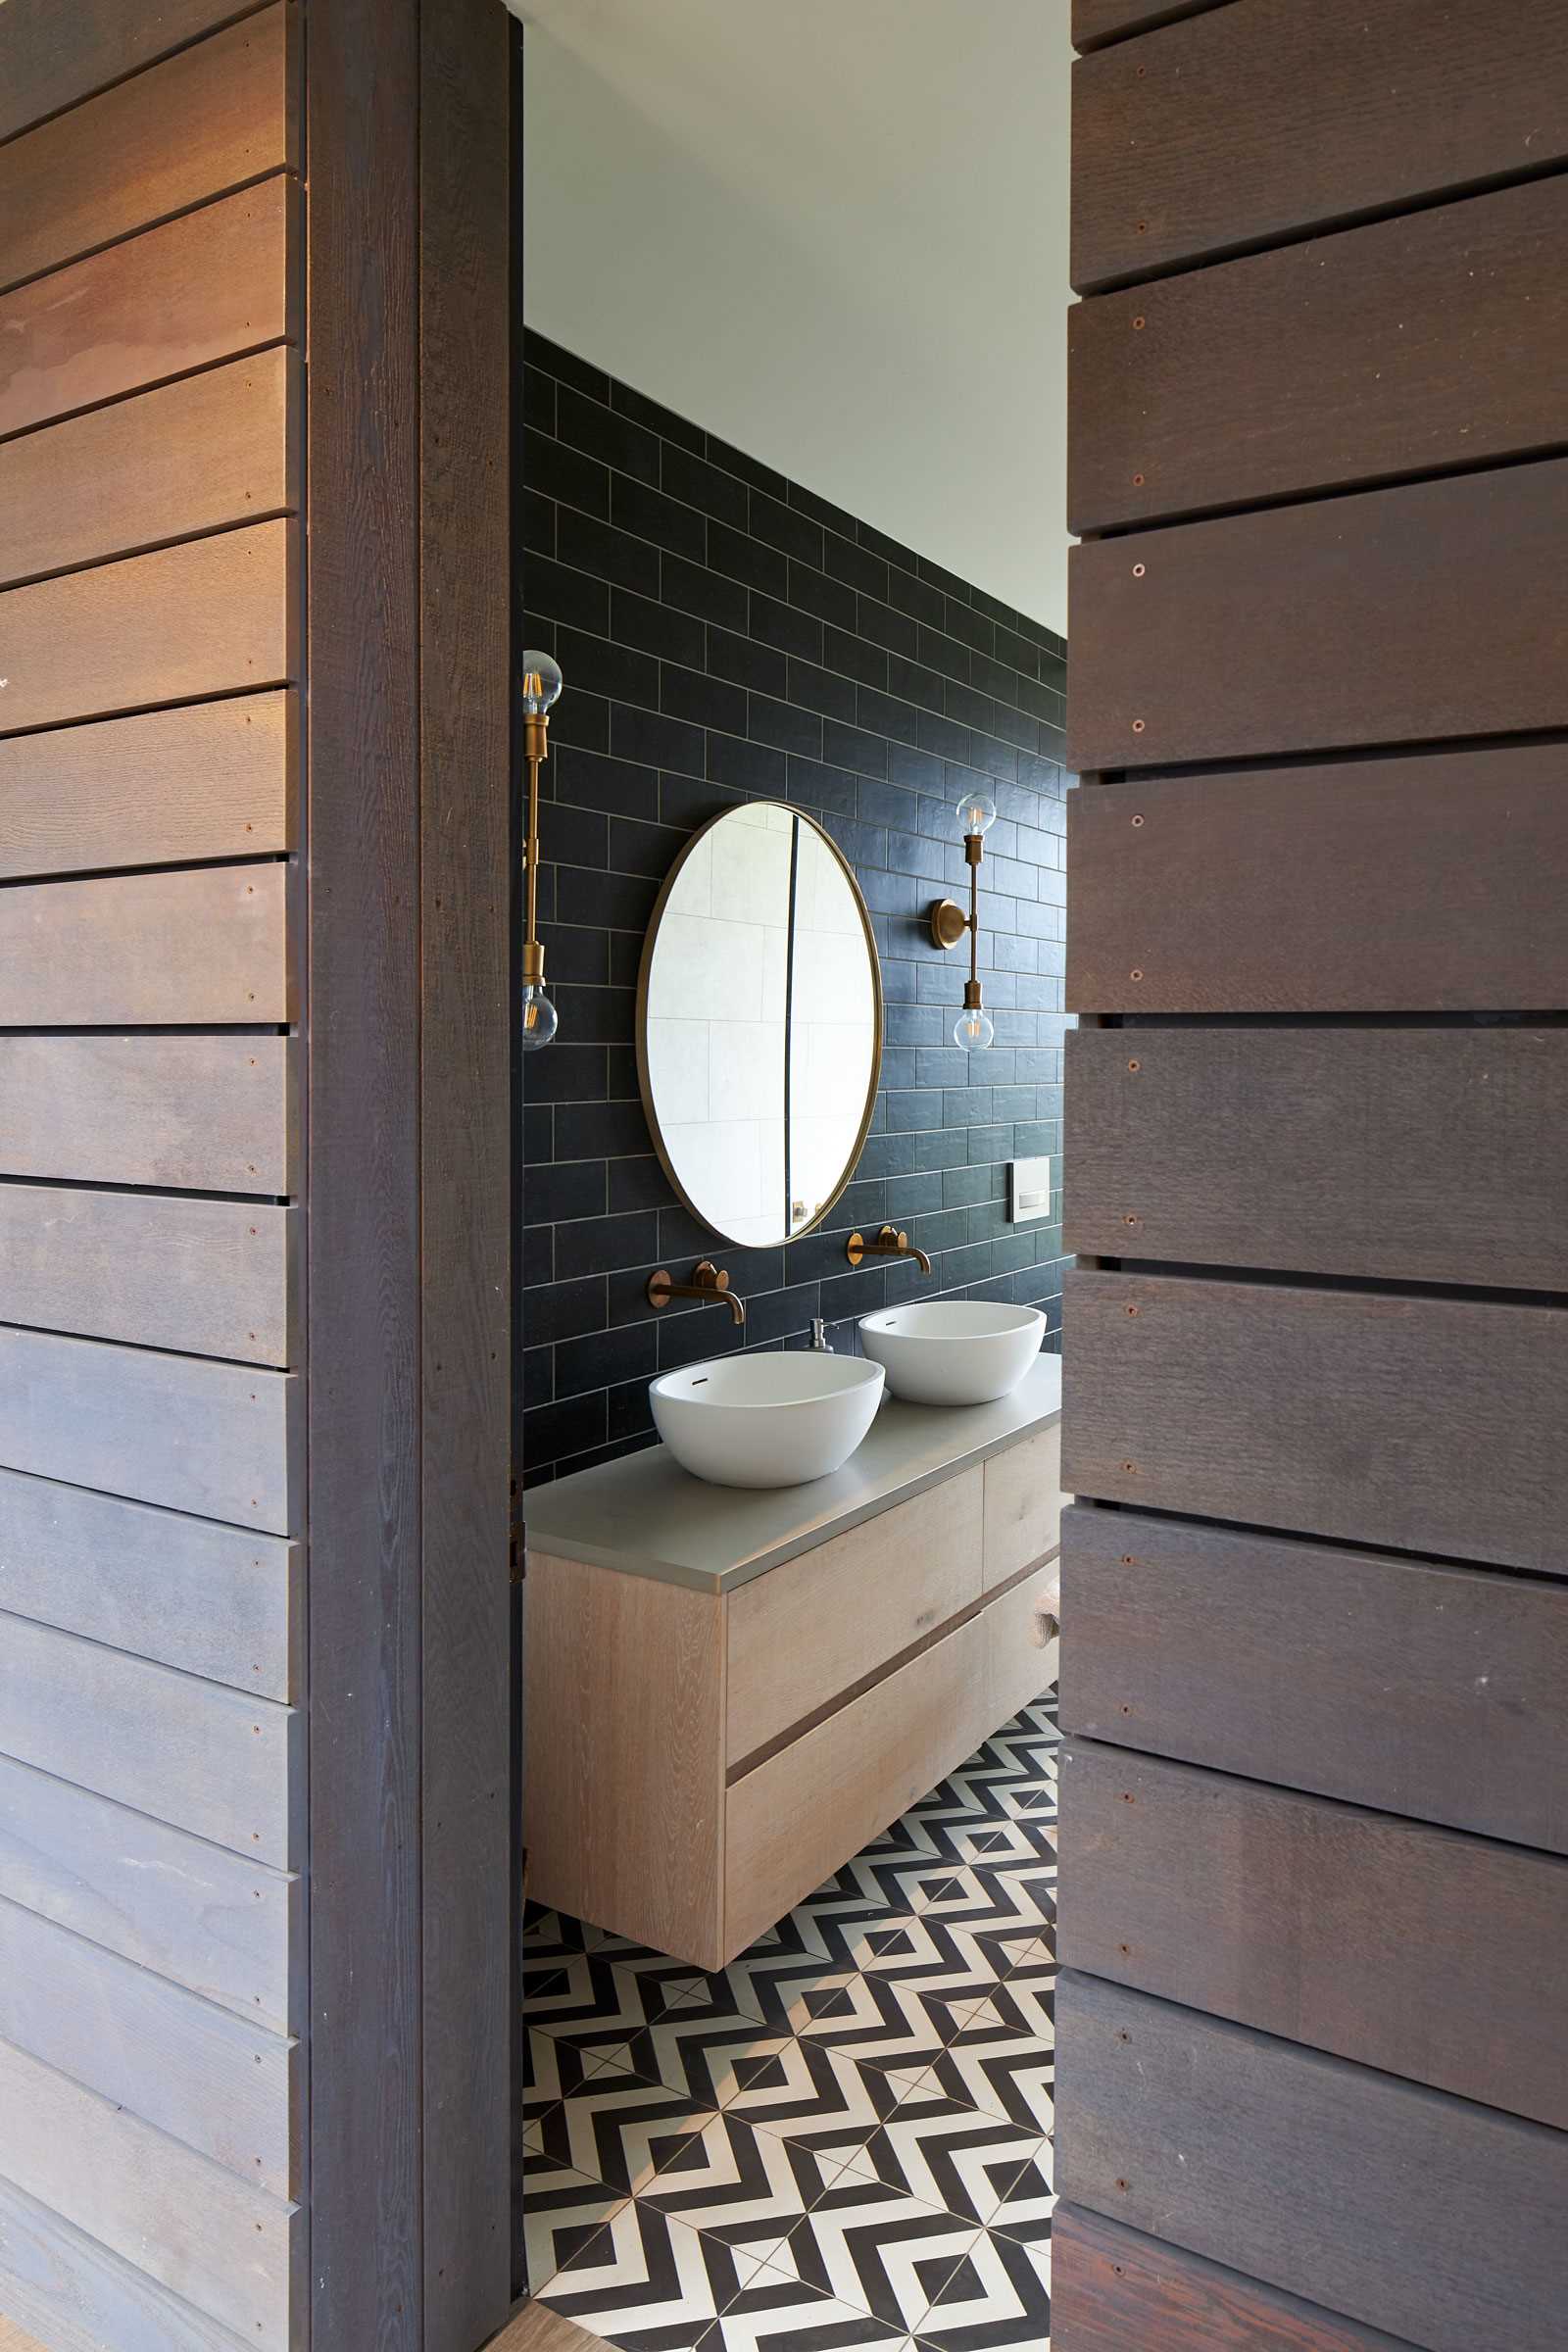 In this modern bathroom, black subway tiles line the wall, while graphic black and white tiles are featured on the floor. A floating wood vanity adds a natural element, and the freestanding bathtub is positioned in front of the floor-to-ceiling window.